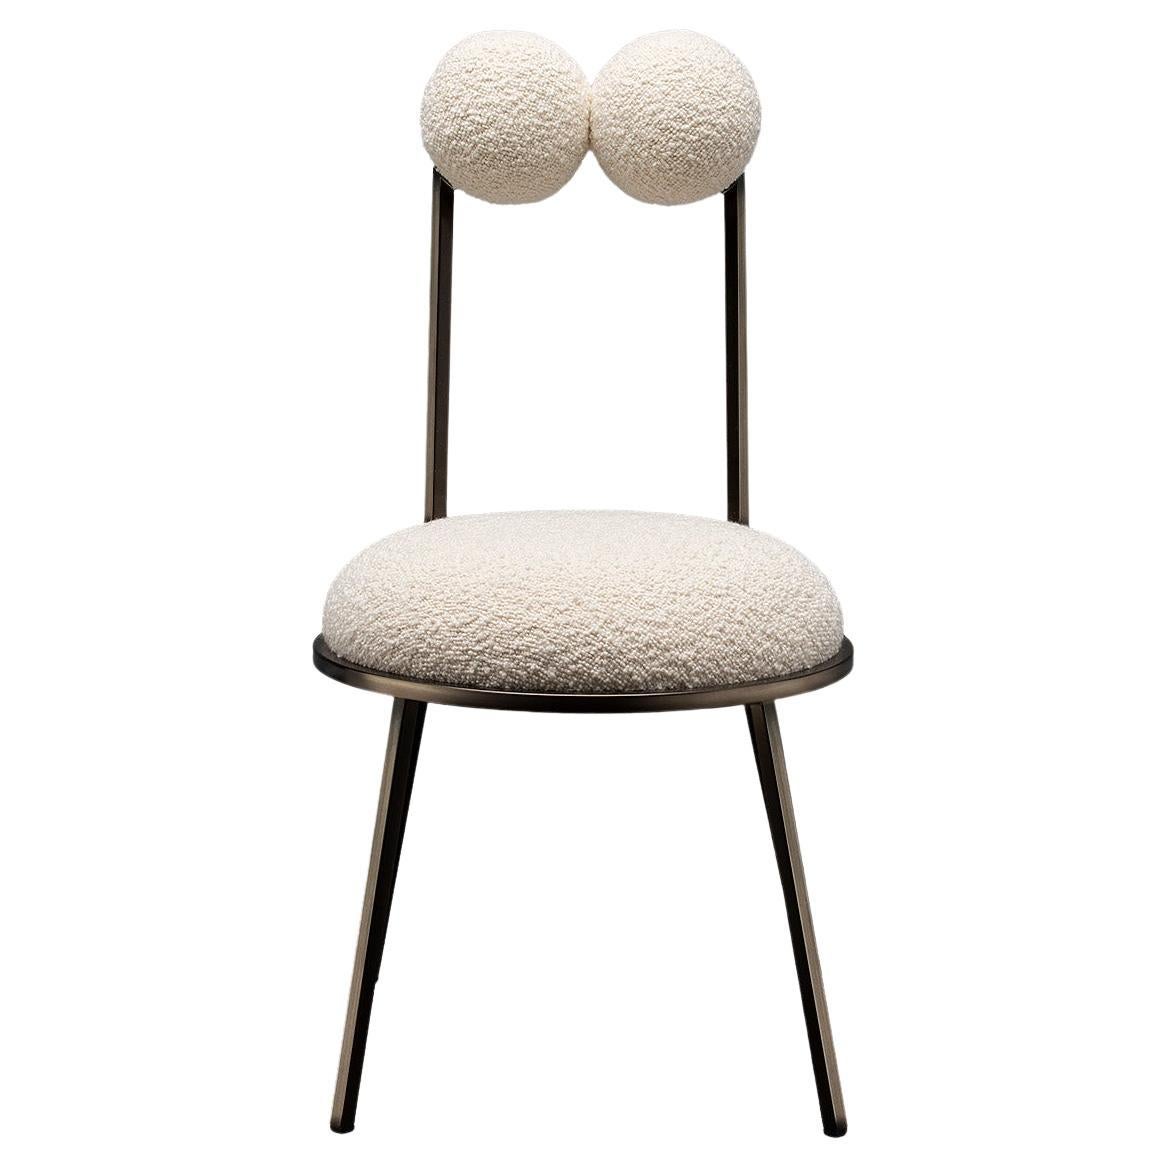 Trevor dining chair makes a perfect accompaniment for the tea room, its round spheres forming backrest and armrests, floating on thin metal rods, just like bonbons speared on cocktail sticks. Almost frog-like in its appearance, the chairs take the